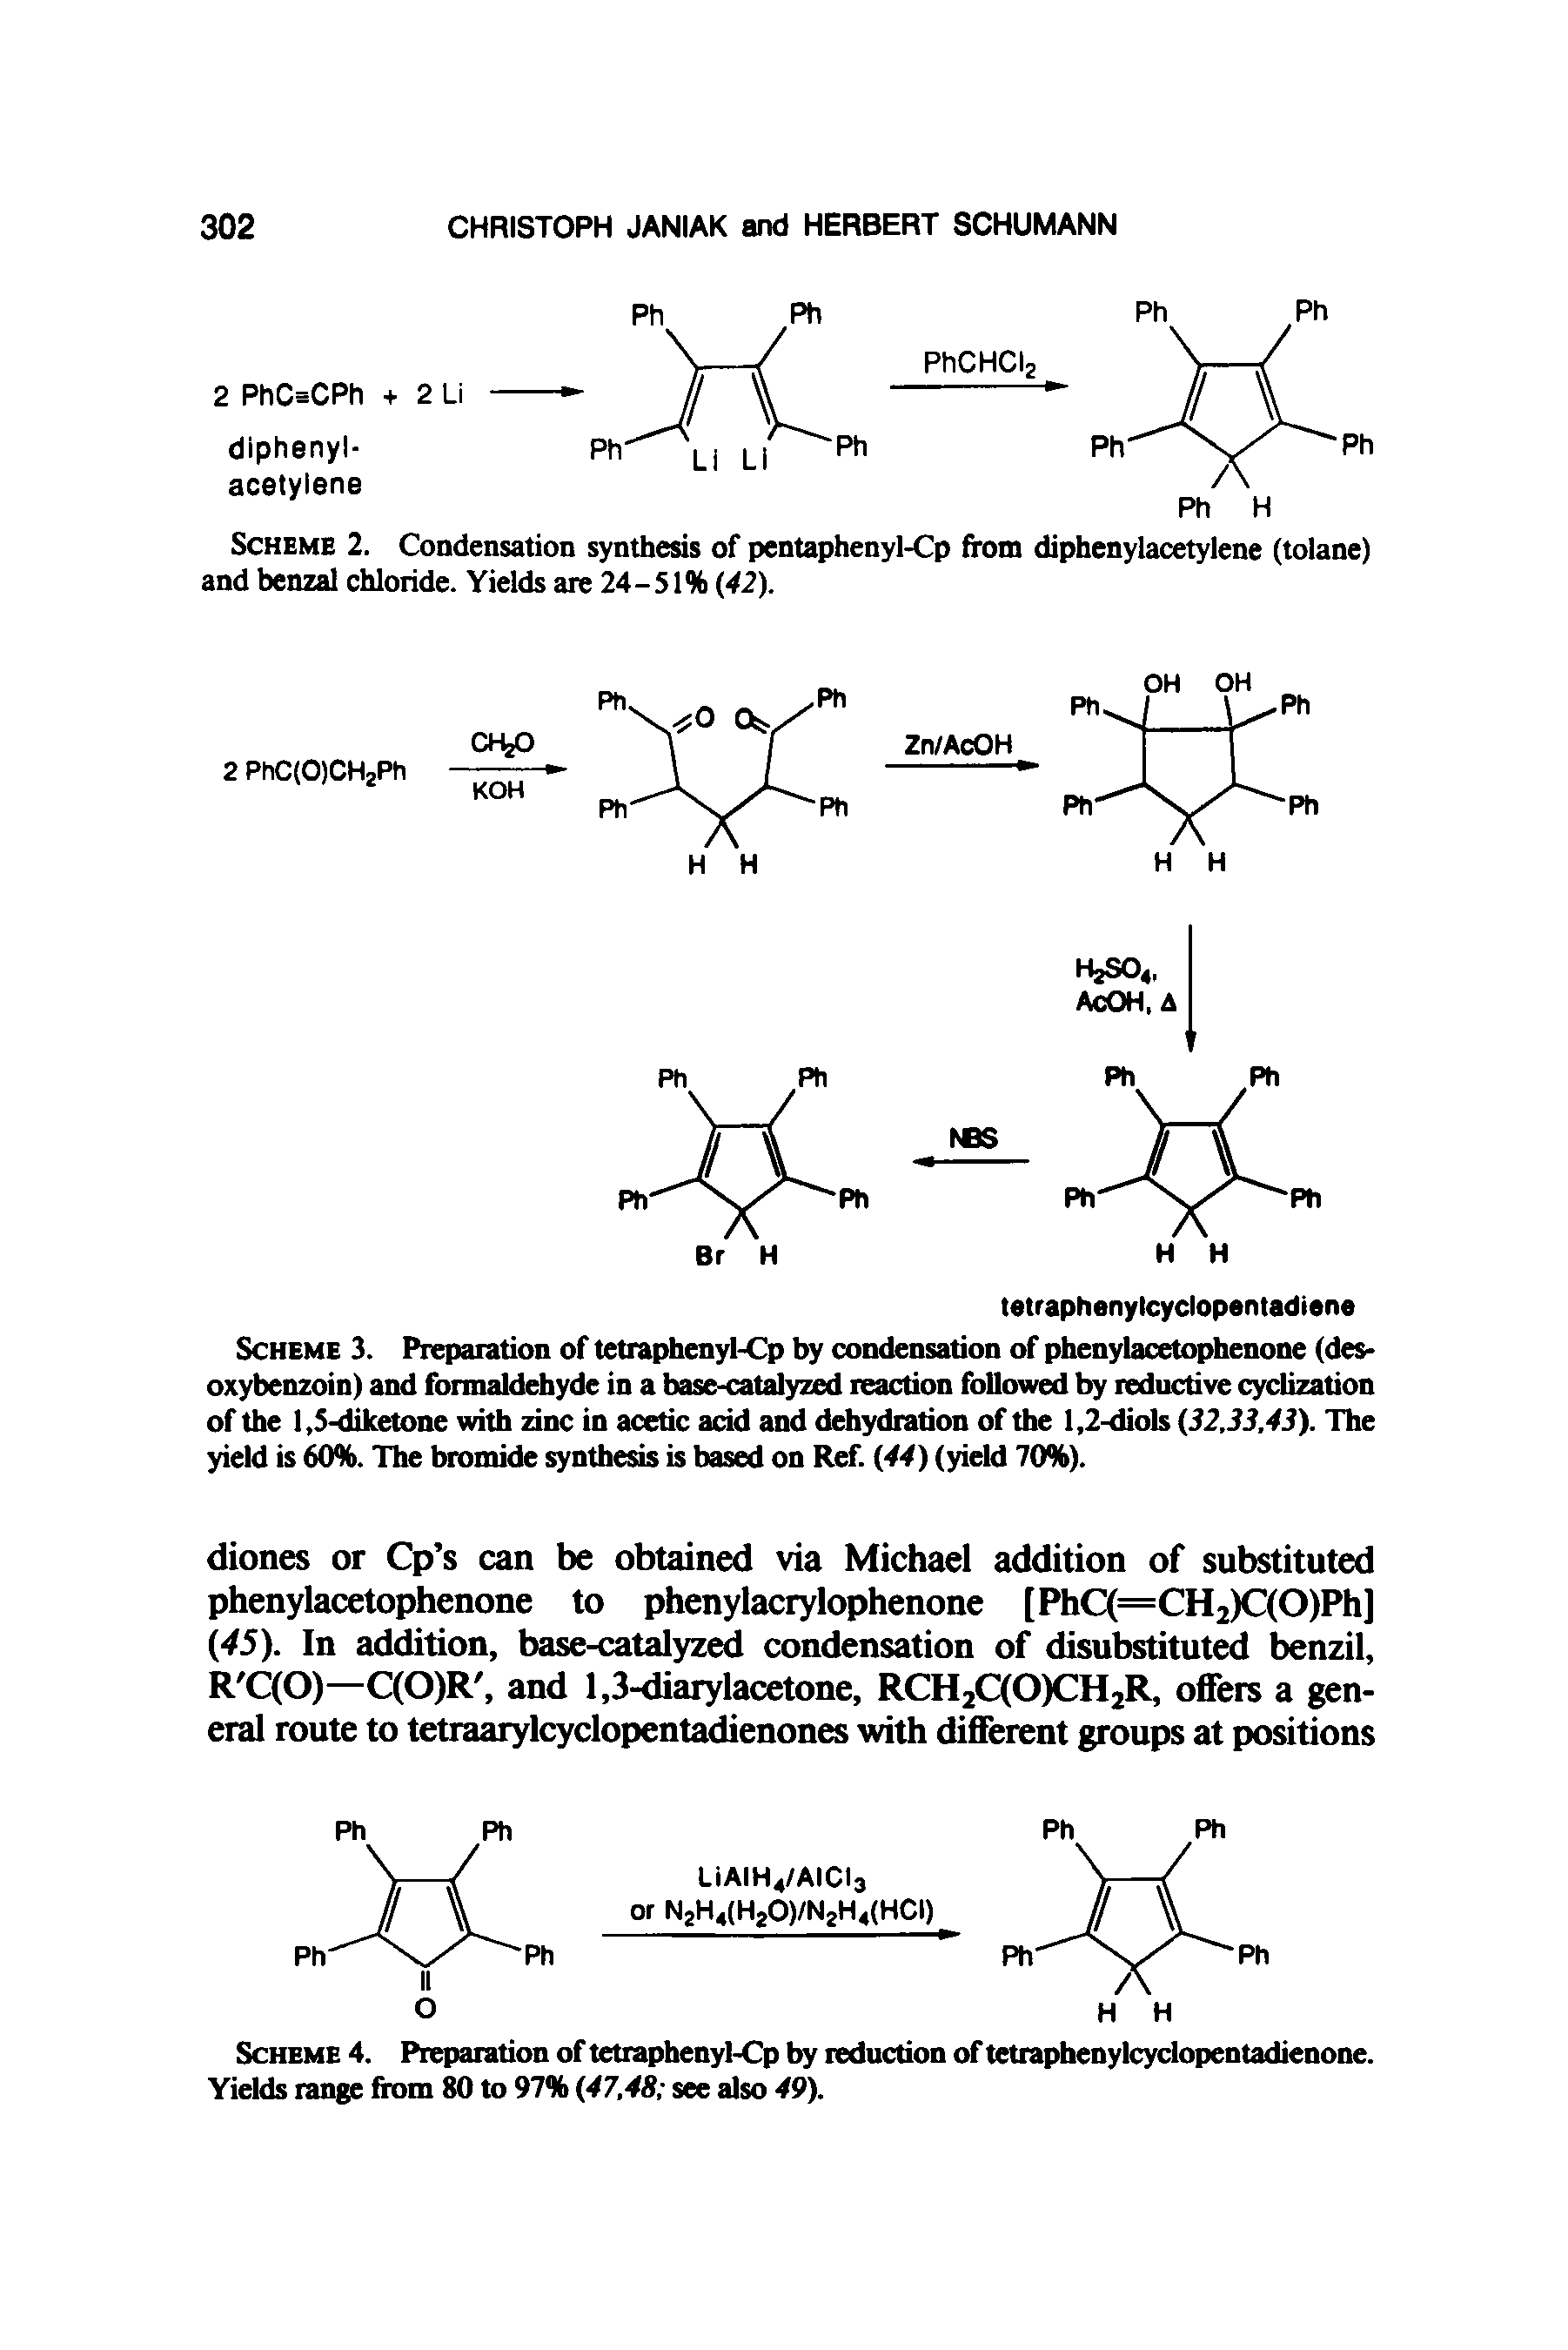 Scheme 3. Preparation of tetraphenyl-Cp by condensation of phenylacetophenone (des-oxybenzoin) and formaldehyde in a base-catalyzed reaction followed by reductive cyclization of the 1,5-diketone with zinc in acetic add and dehydration of the 1,2-diols (32,33,43). The yield is 60%. The bromide synthesis is based on Ref. (44) (yield 70%).